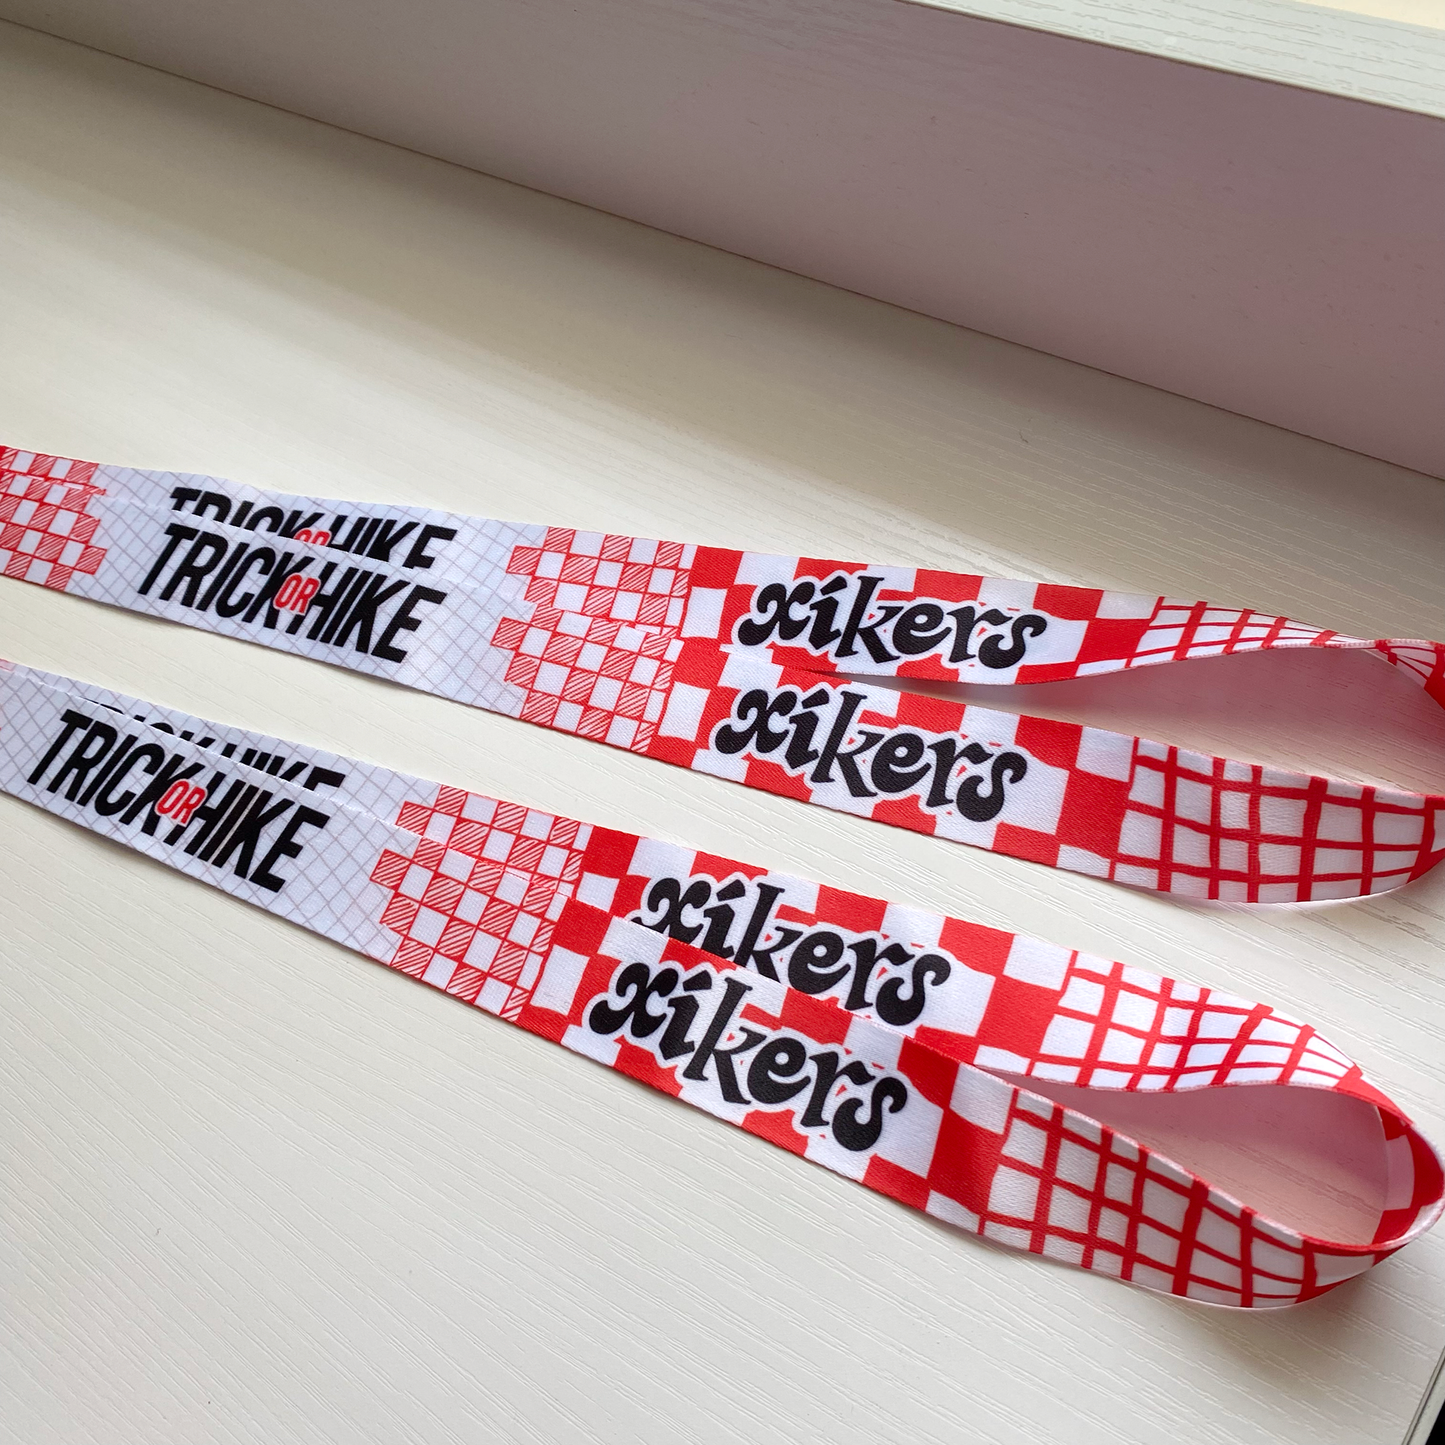 XIKERS "House of Tricky" Inspired Lanyard